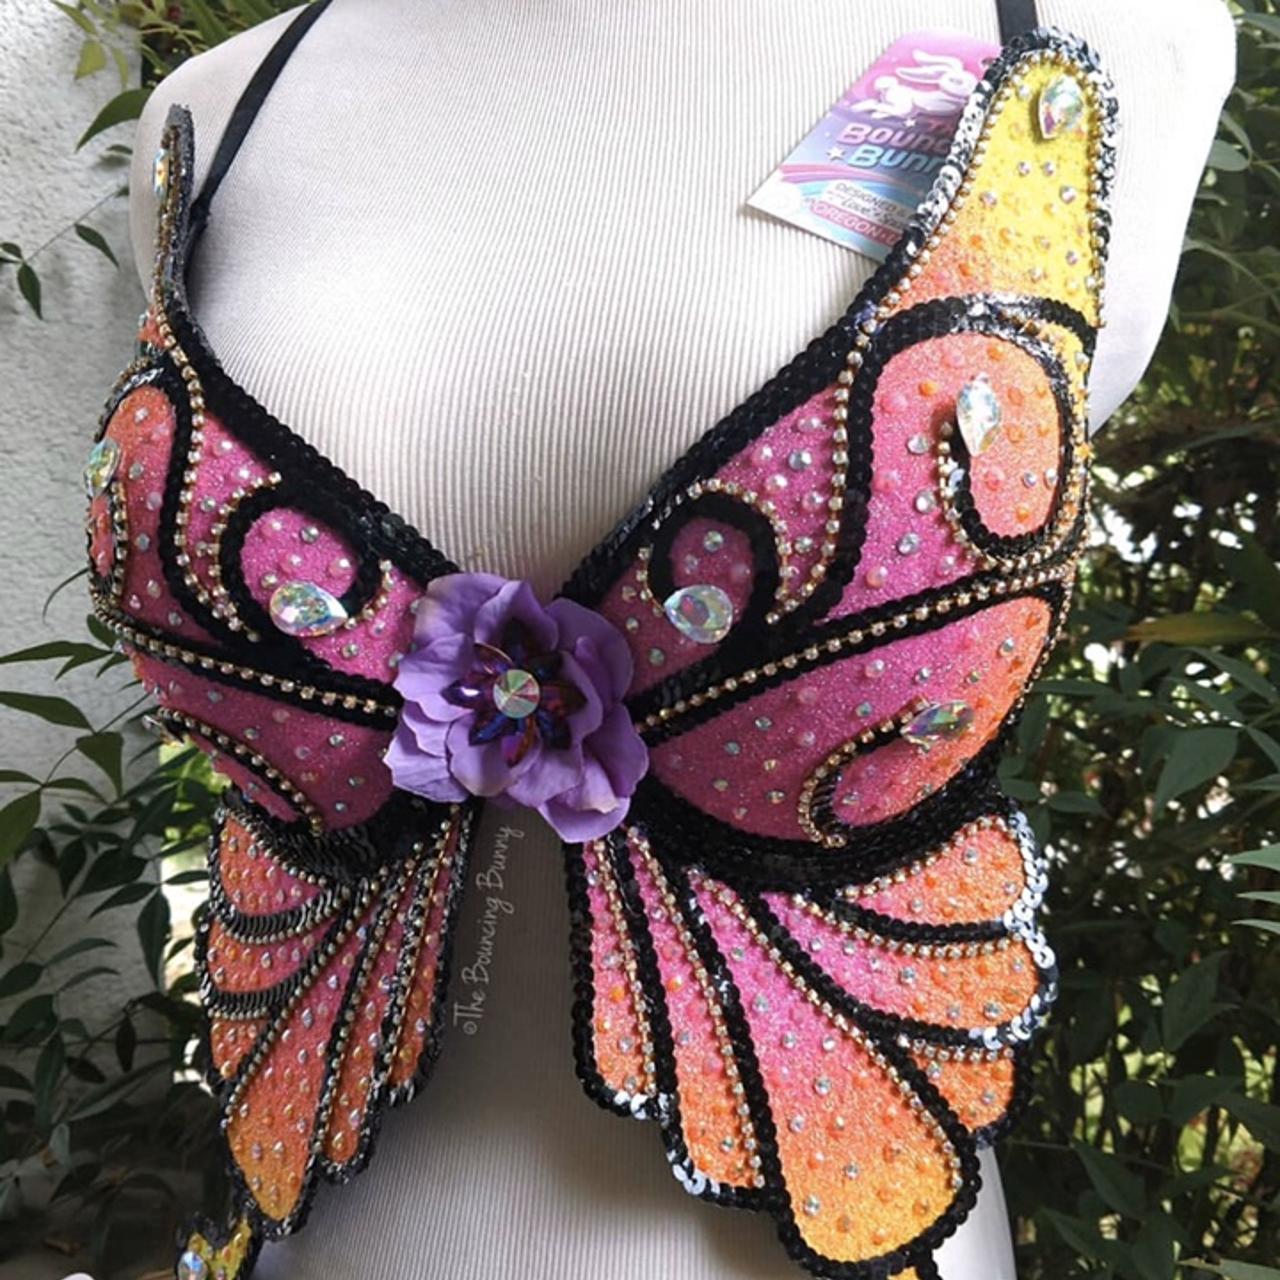 Custom made butterfly bra from (the bouncing bunny)